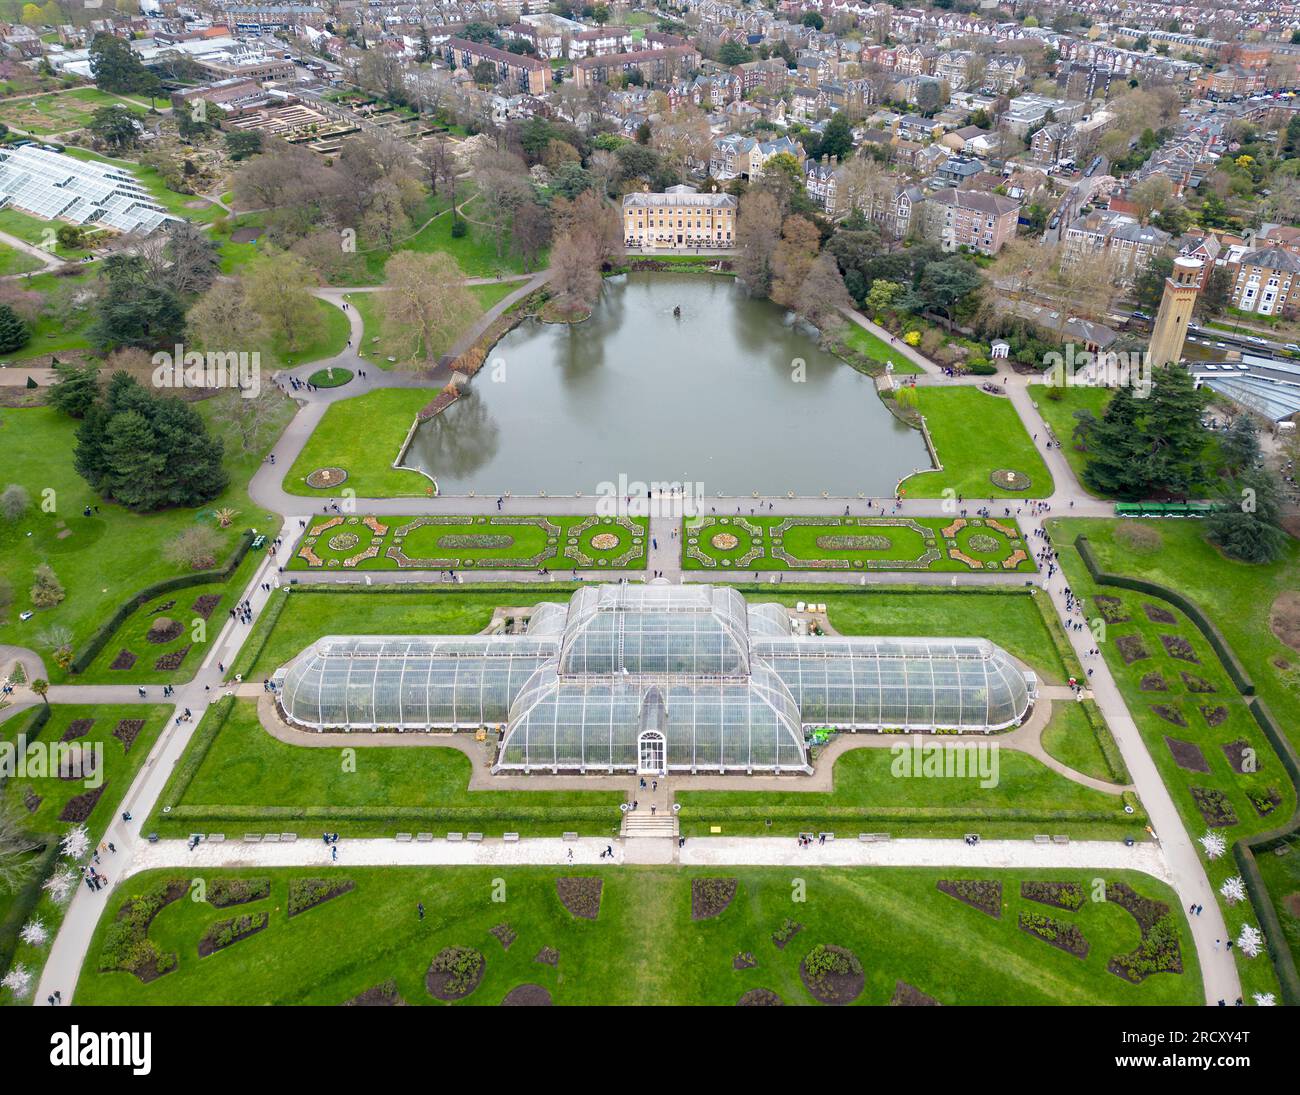 Aerial view of The Palm House, Kew Gardens, London, England Stock Photo